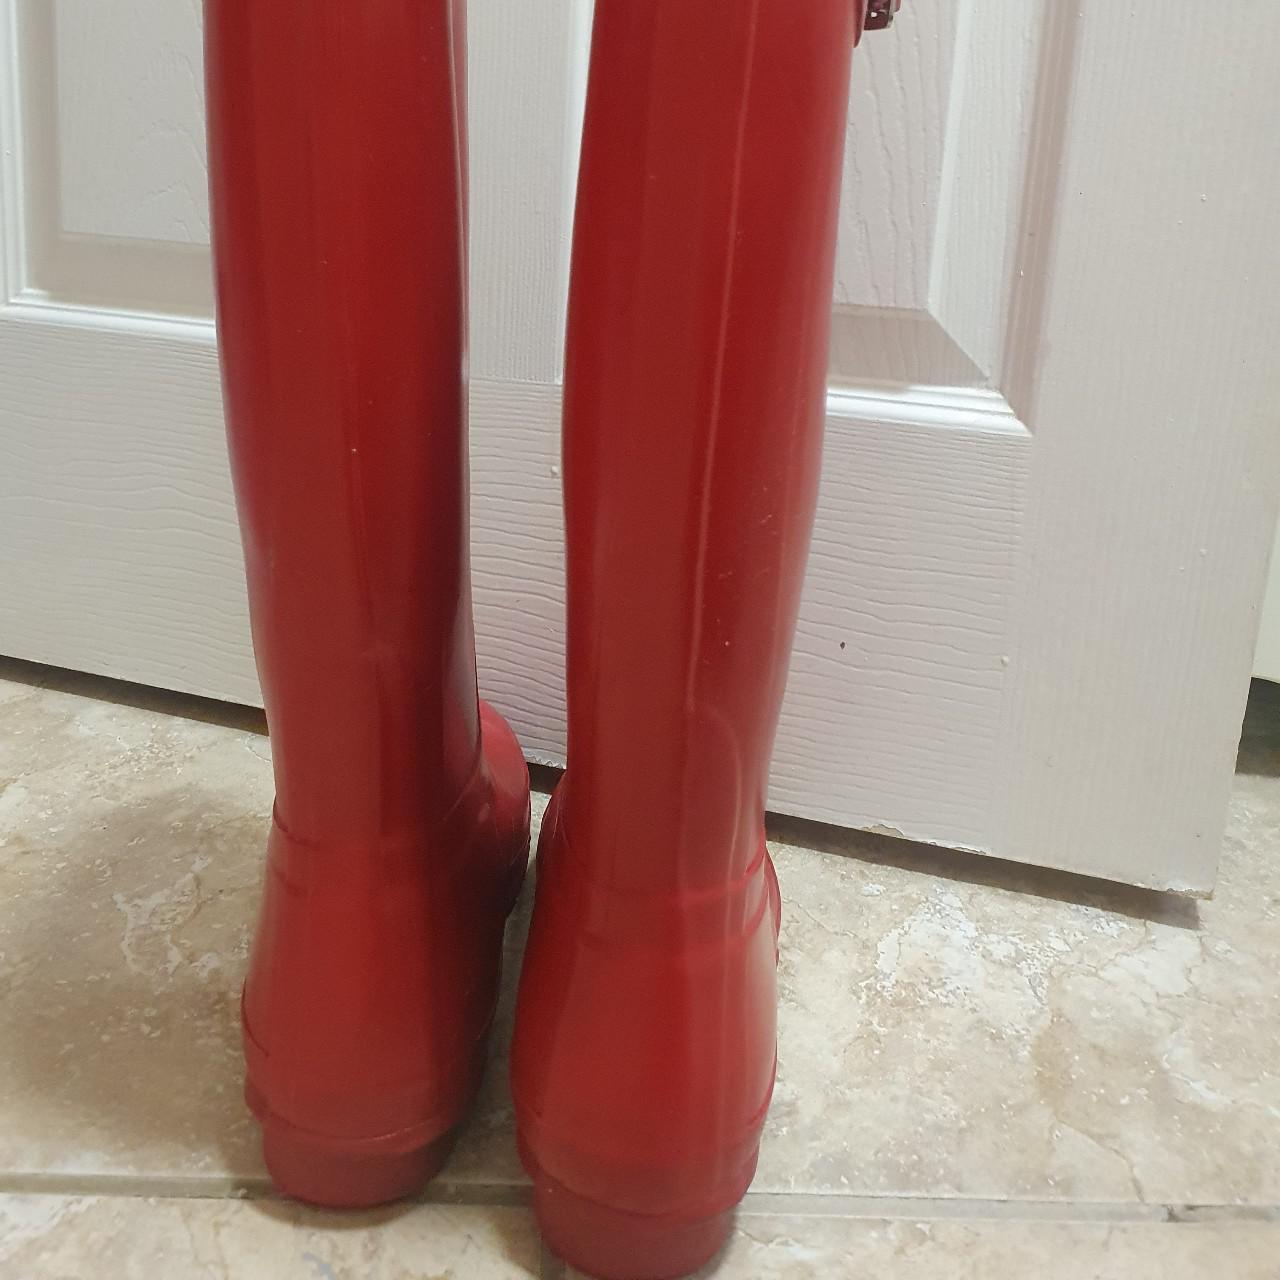 Tall red hunter wellies size uk 5. Has some wear as... - Depop